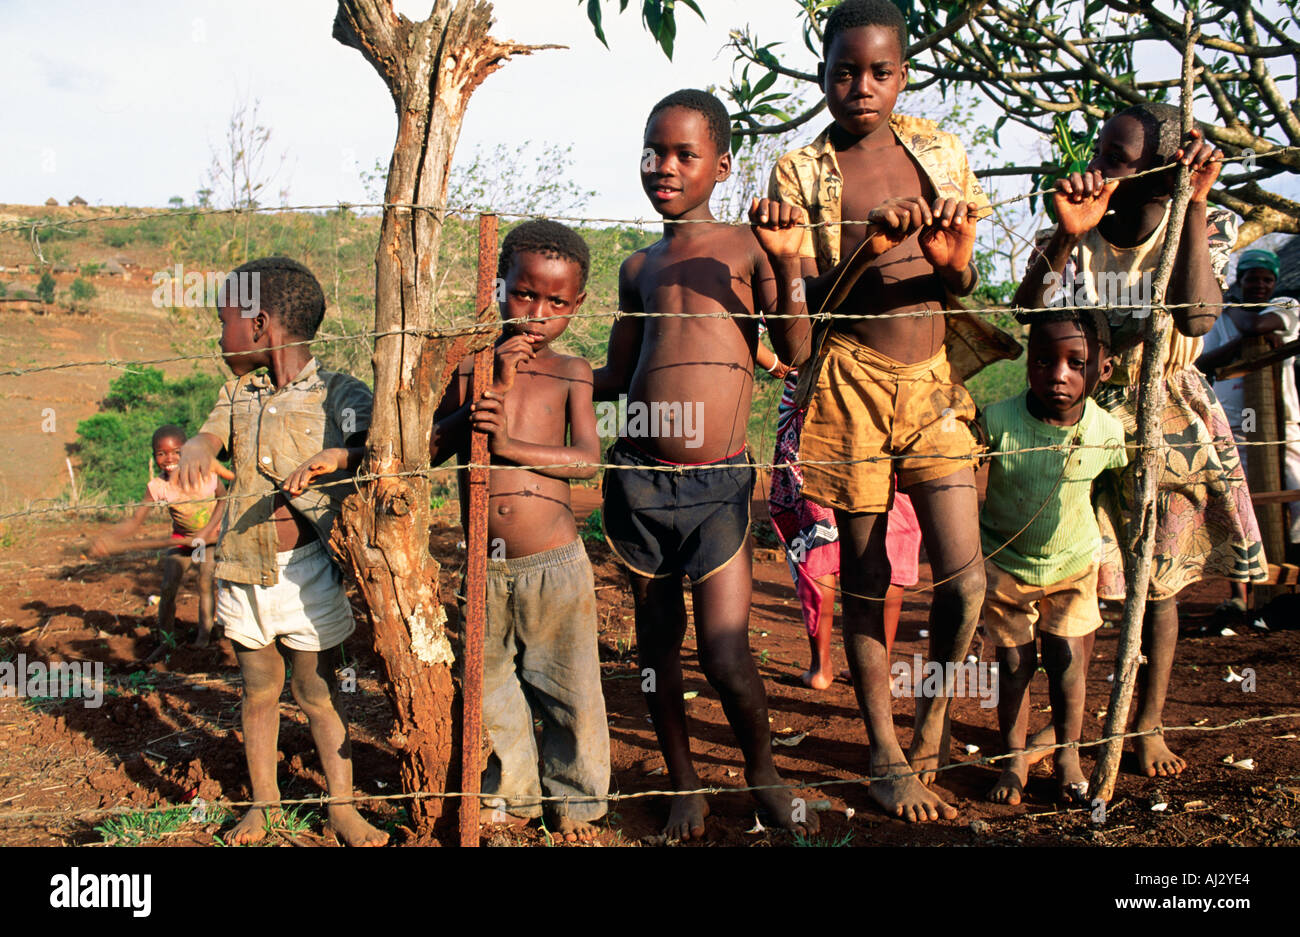 A portrait of six children living in rural poverty on a subsistence farm. with little or no access to education. Eswatini (Swaziland) Stock Photo